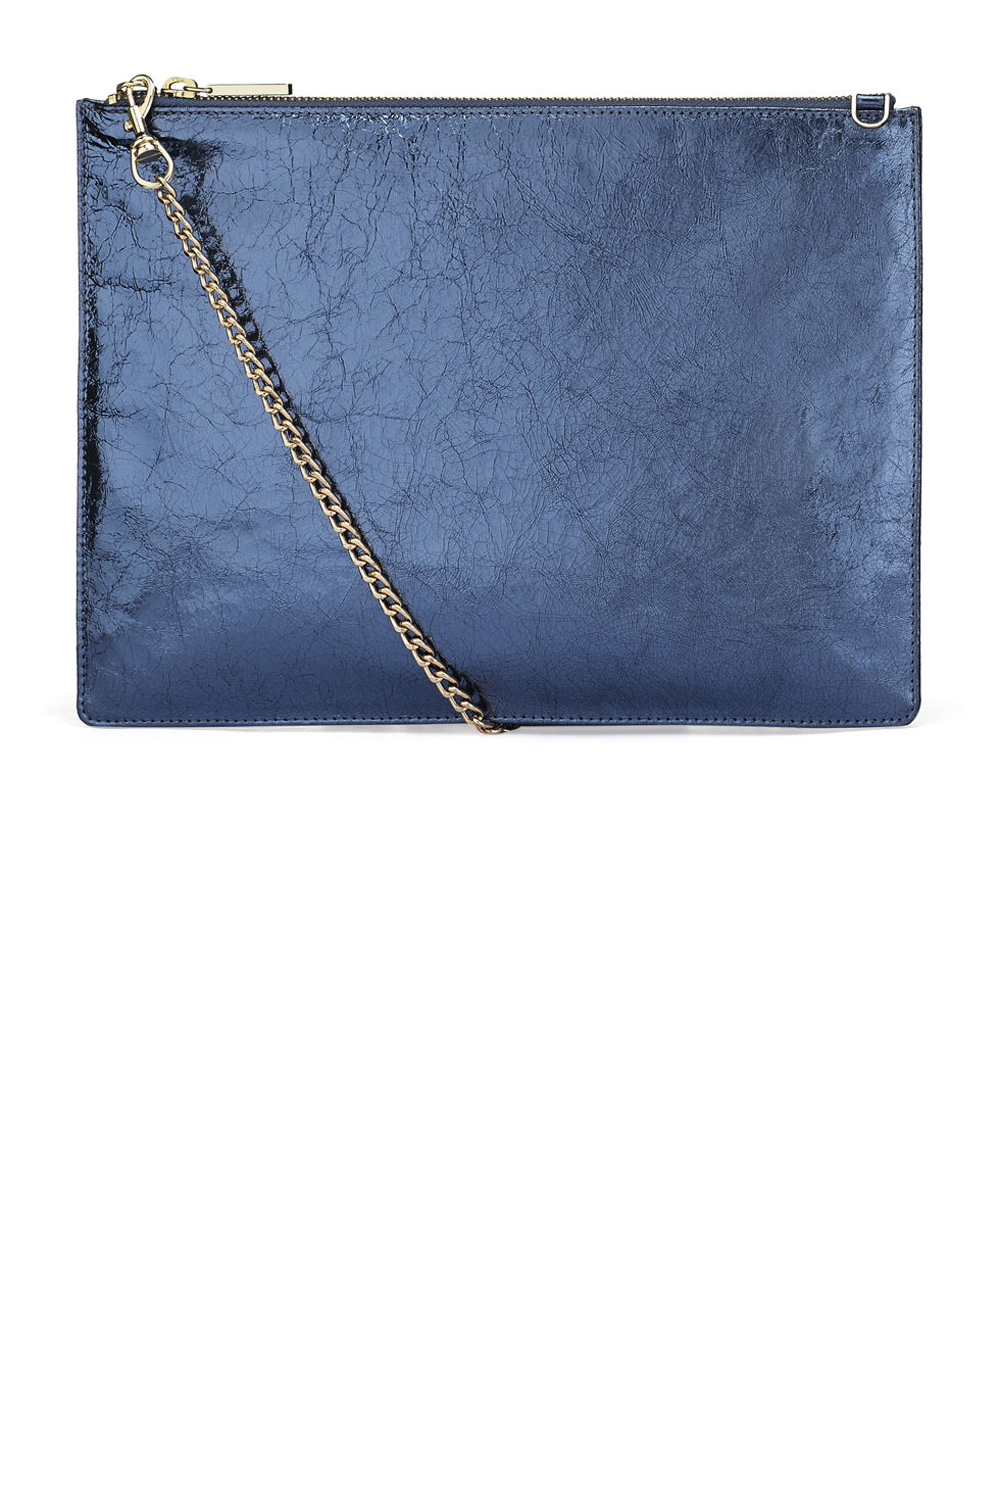 Winter Wedding Guest Outfits - Whistles Rivington Pouch, £63.75 - Page ...